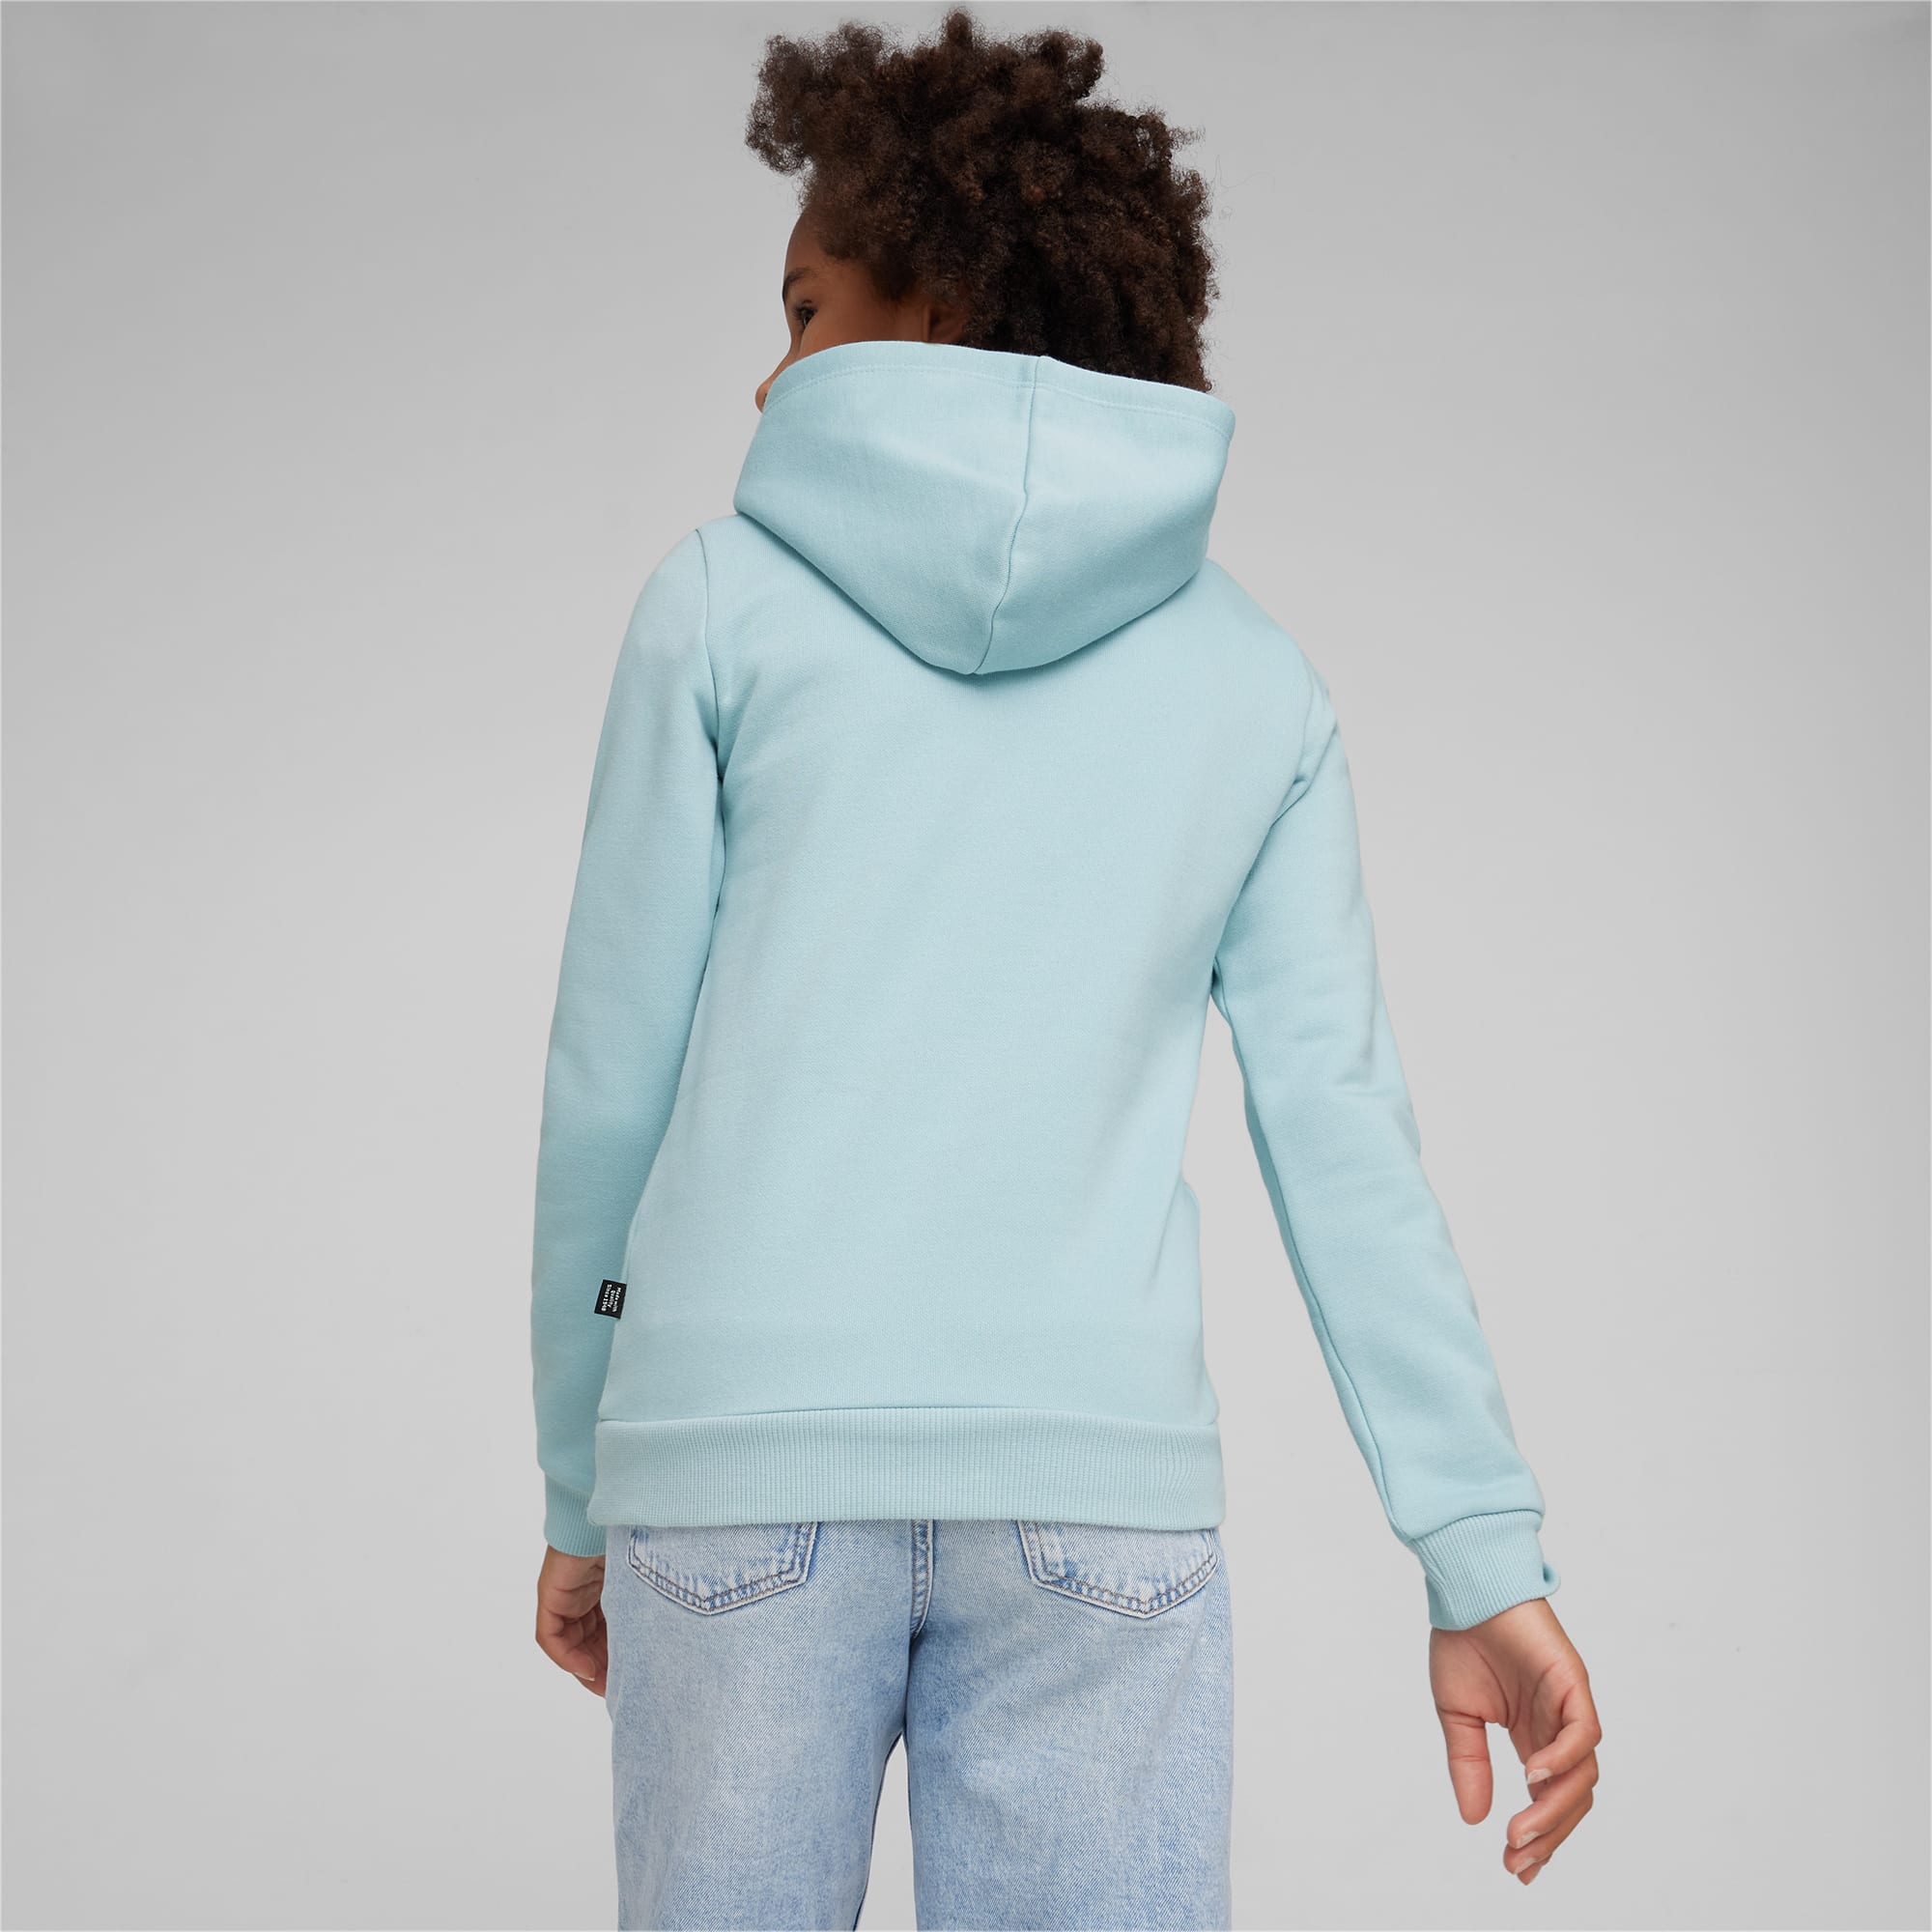 PUMA Essentials Logo Youth Hoodie, Turquoise Surf, Size 110, Clothing